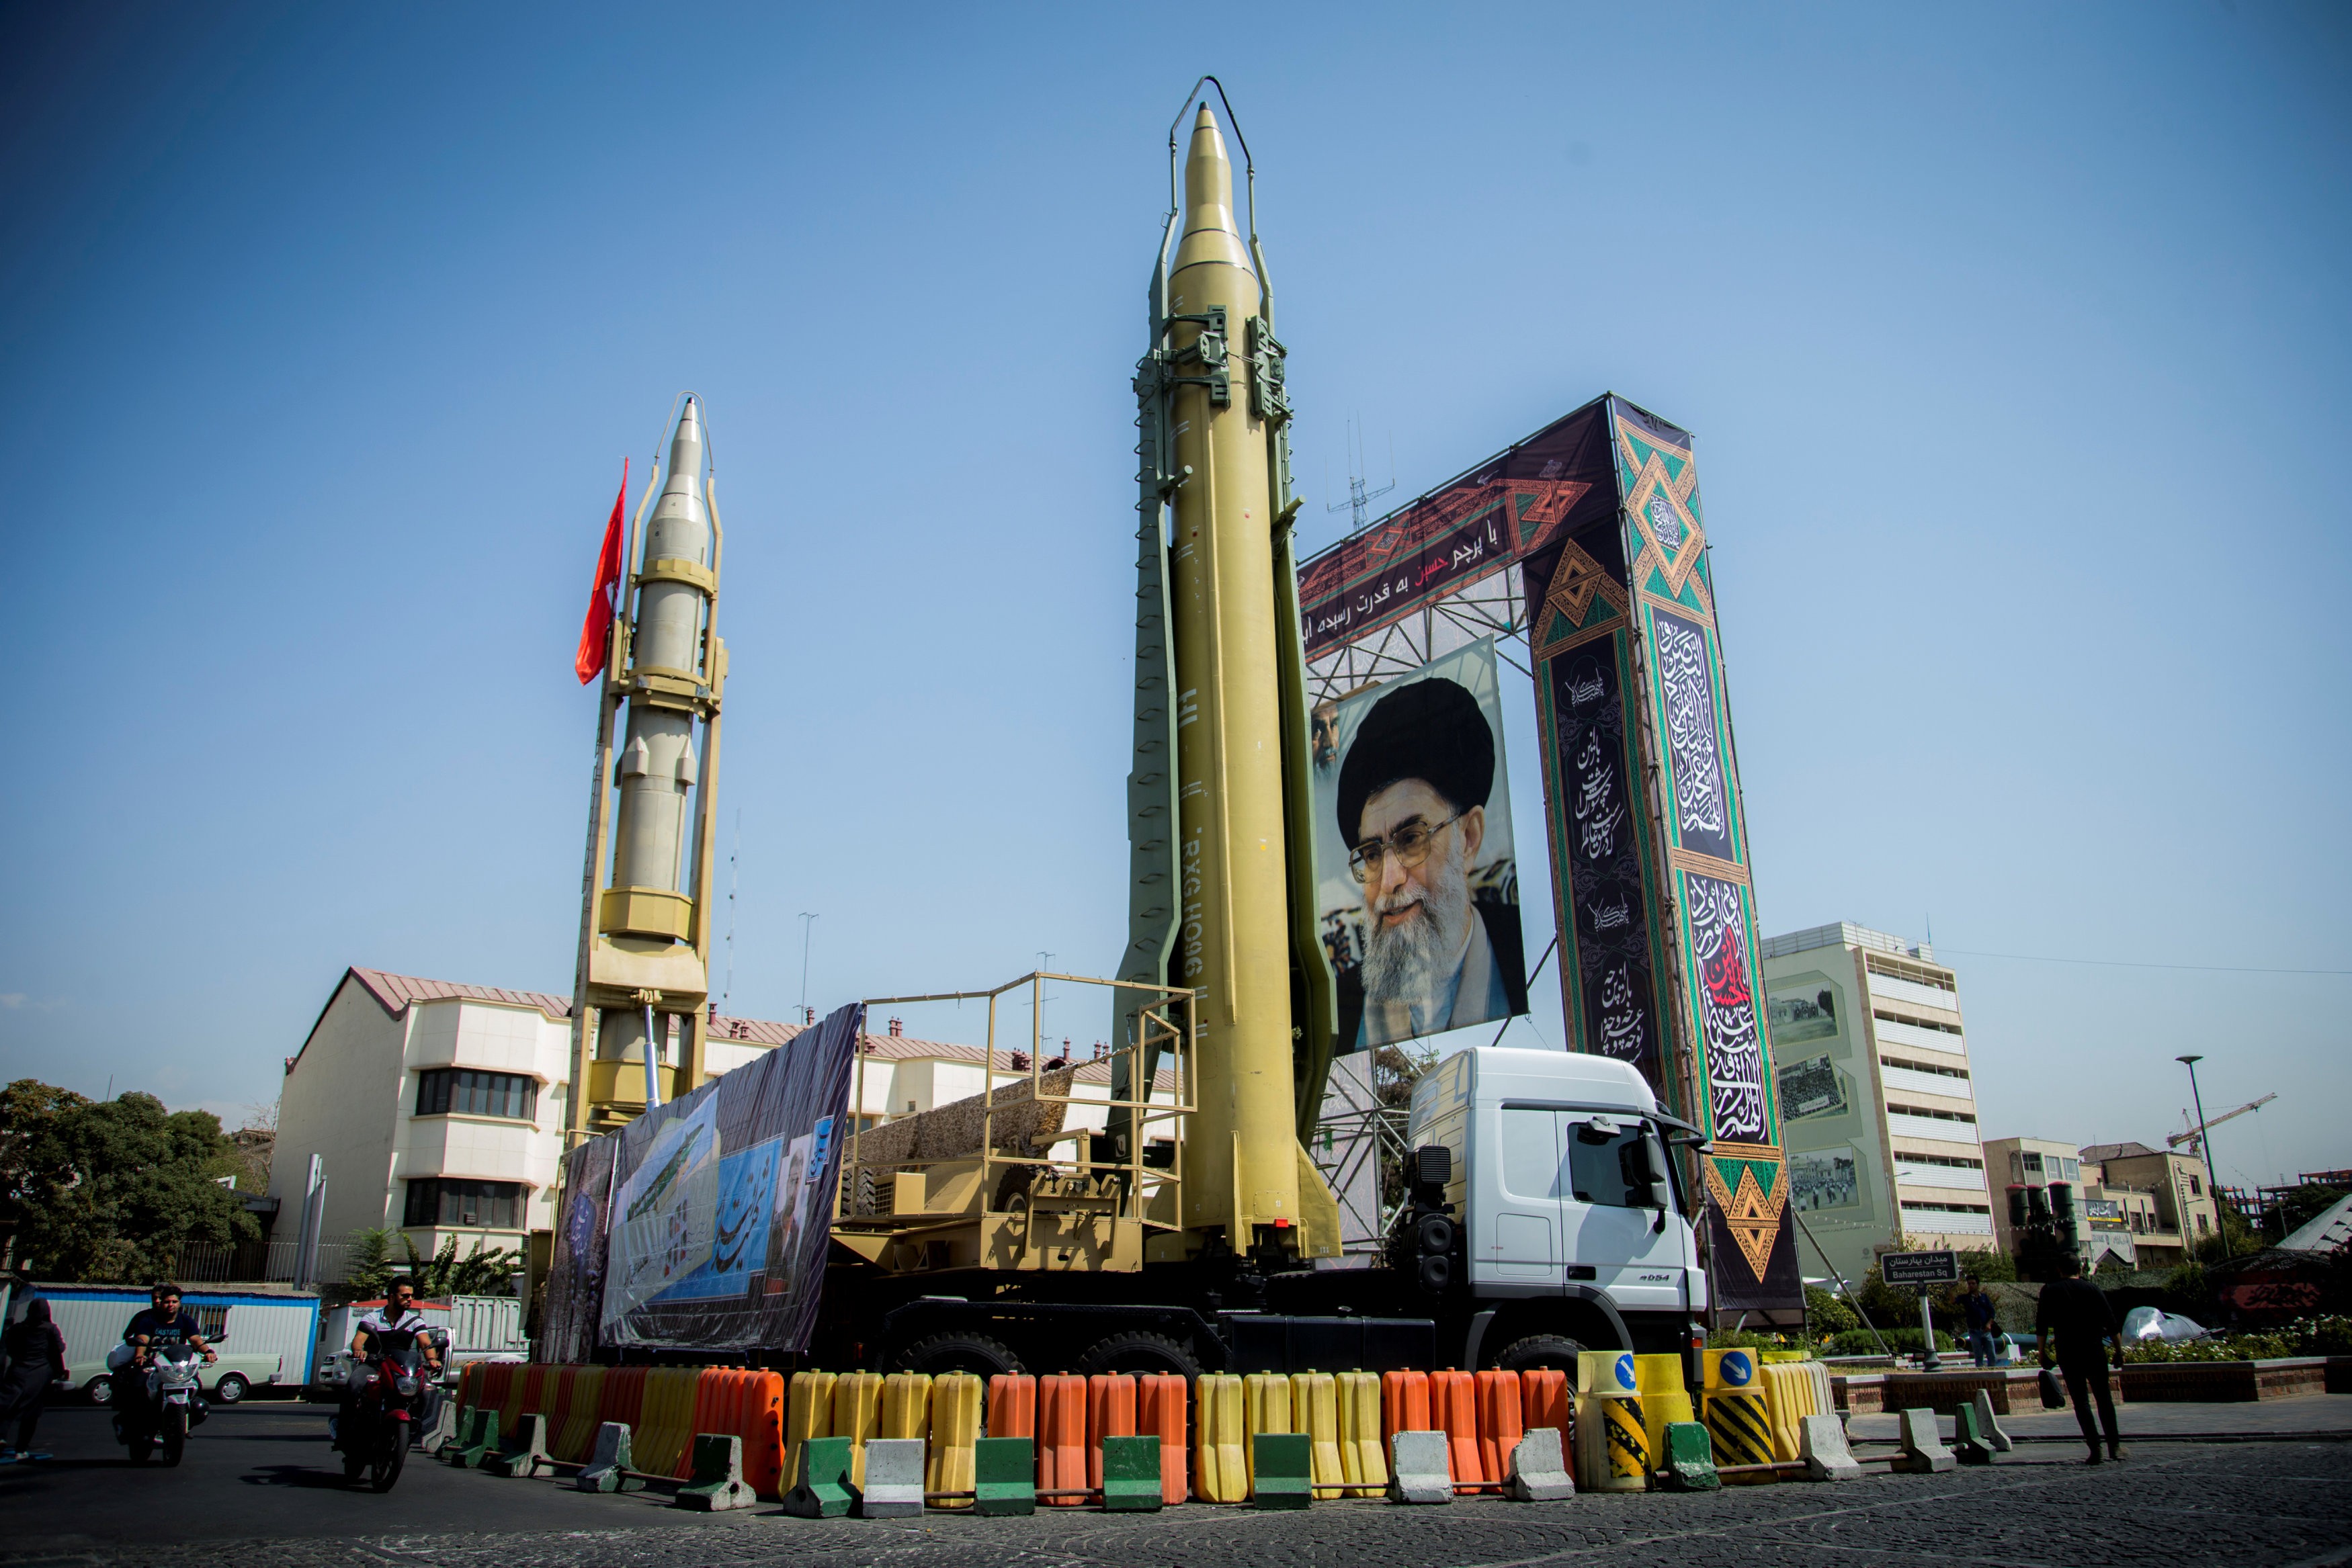 A display featuring missiles and a portrait of Iran's Supreme Leader Ayatollah Ali Khamenei is seen at Baharestan Square in Tehran, on September 27, 2017. Britain, France and Germany are discussing fresh sanctions against Iran to persuade the US not to abandon the nuclear deal with Tehran. Photo: TIMA via Reuters